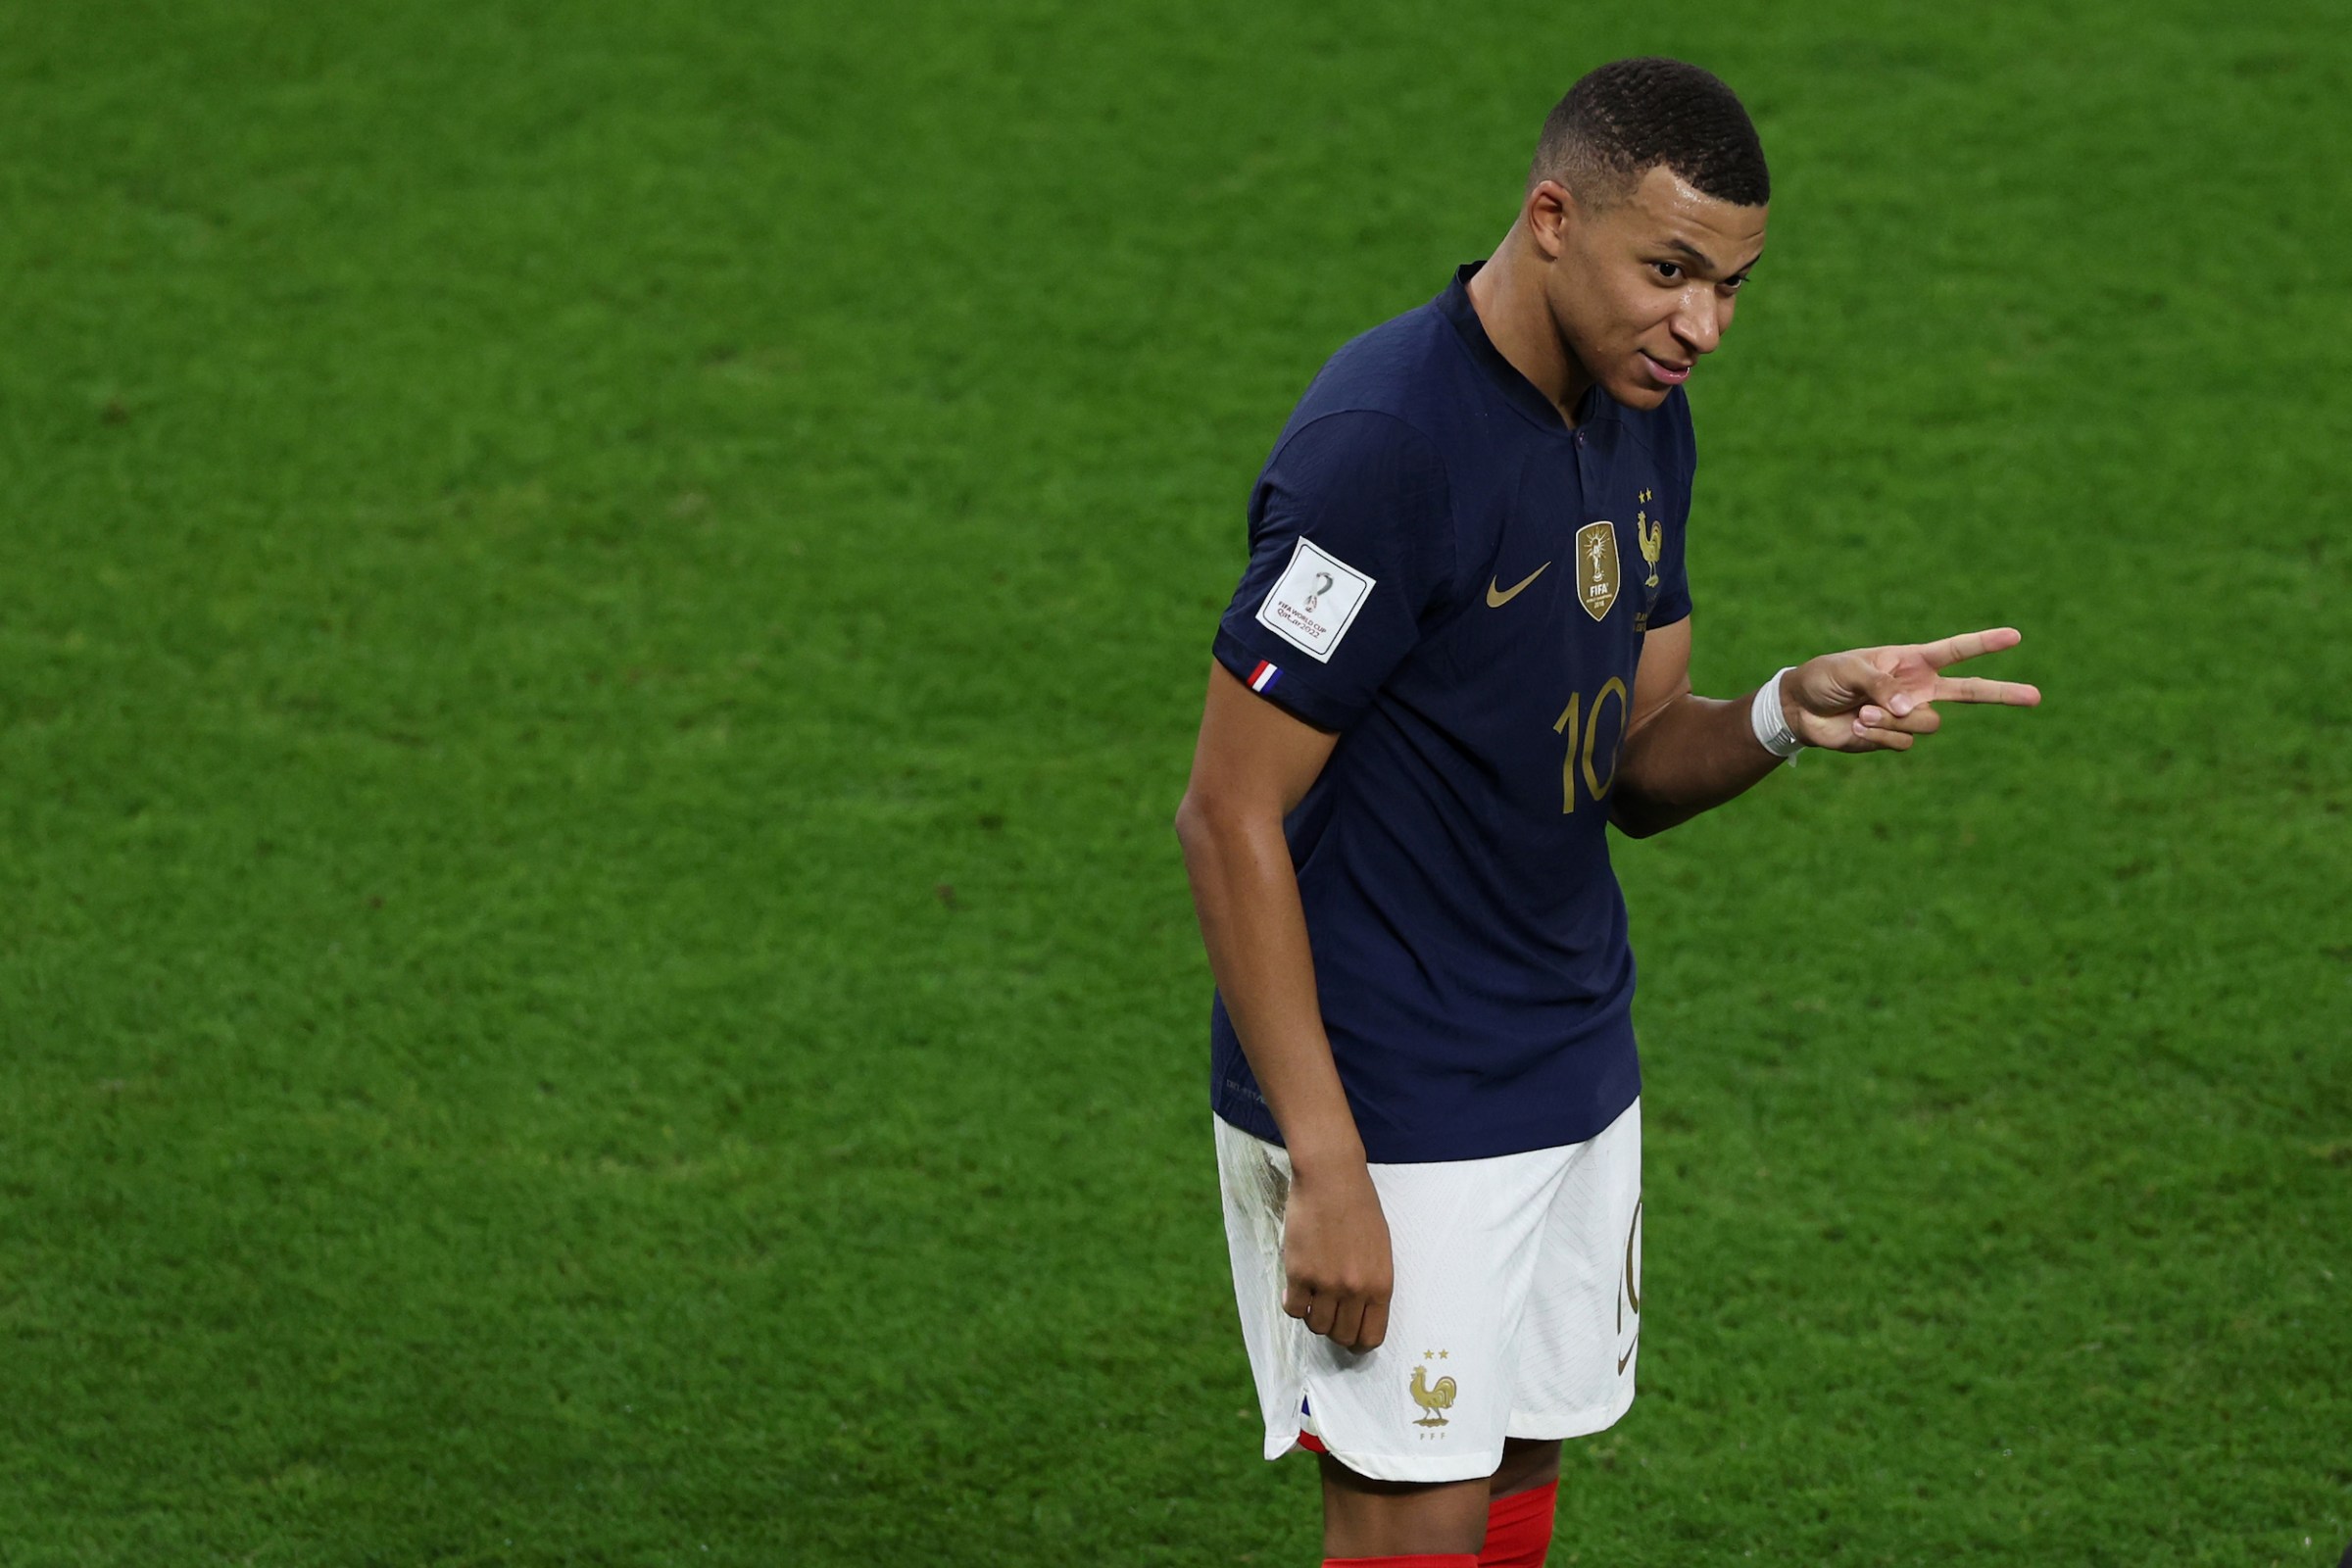 Kylian Mbappé holds up two fingers to signify two goals scored.